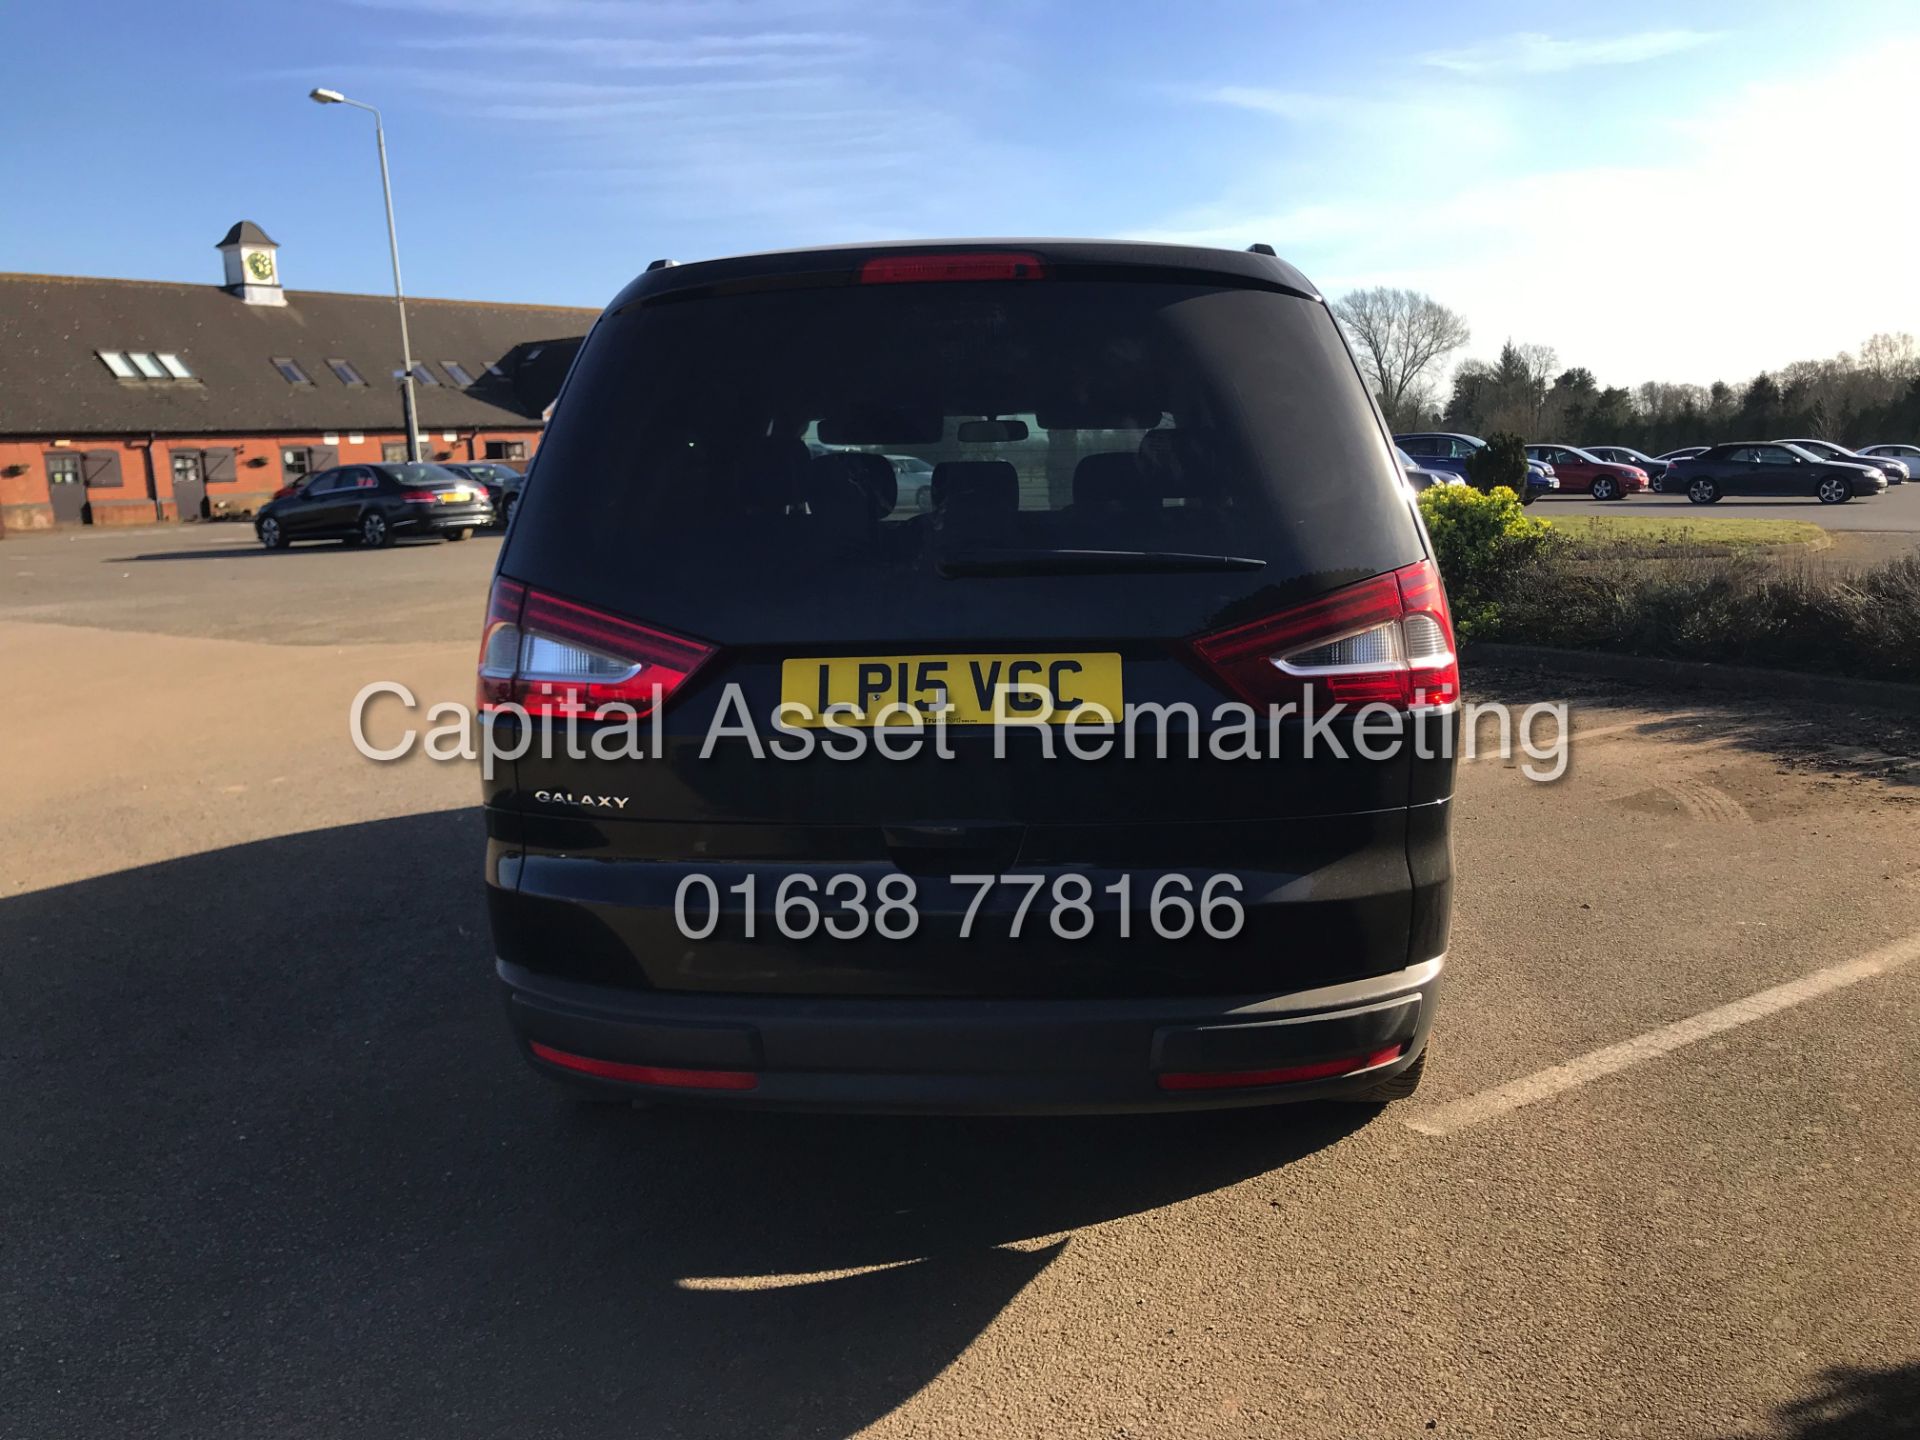 On Sale FORD GALAXY 2.0TDCI "POWER-SHIFT" 7 SEATER (15 REG) 1 OWNER - 140BHP - AIR CON - ELEC PACK - Image 4 of 20